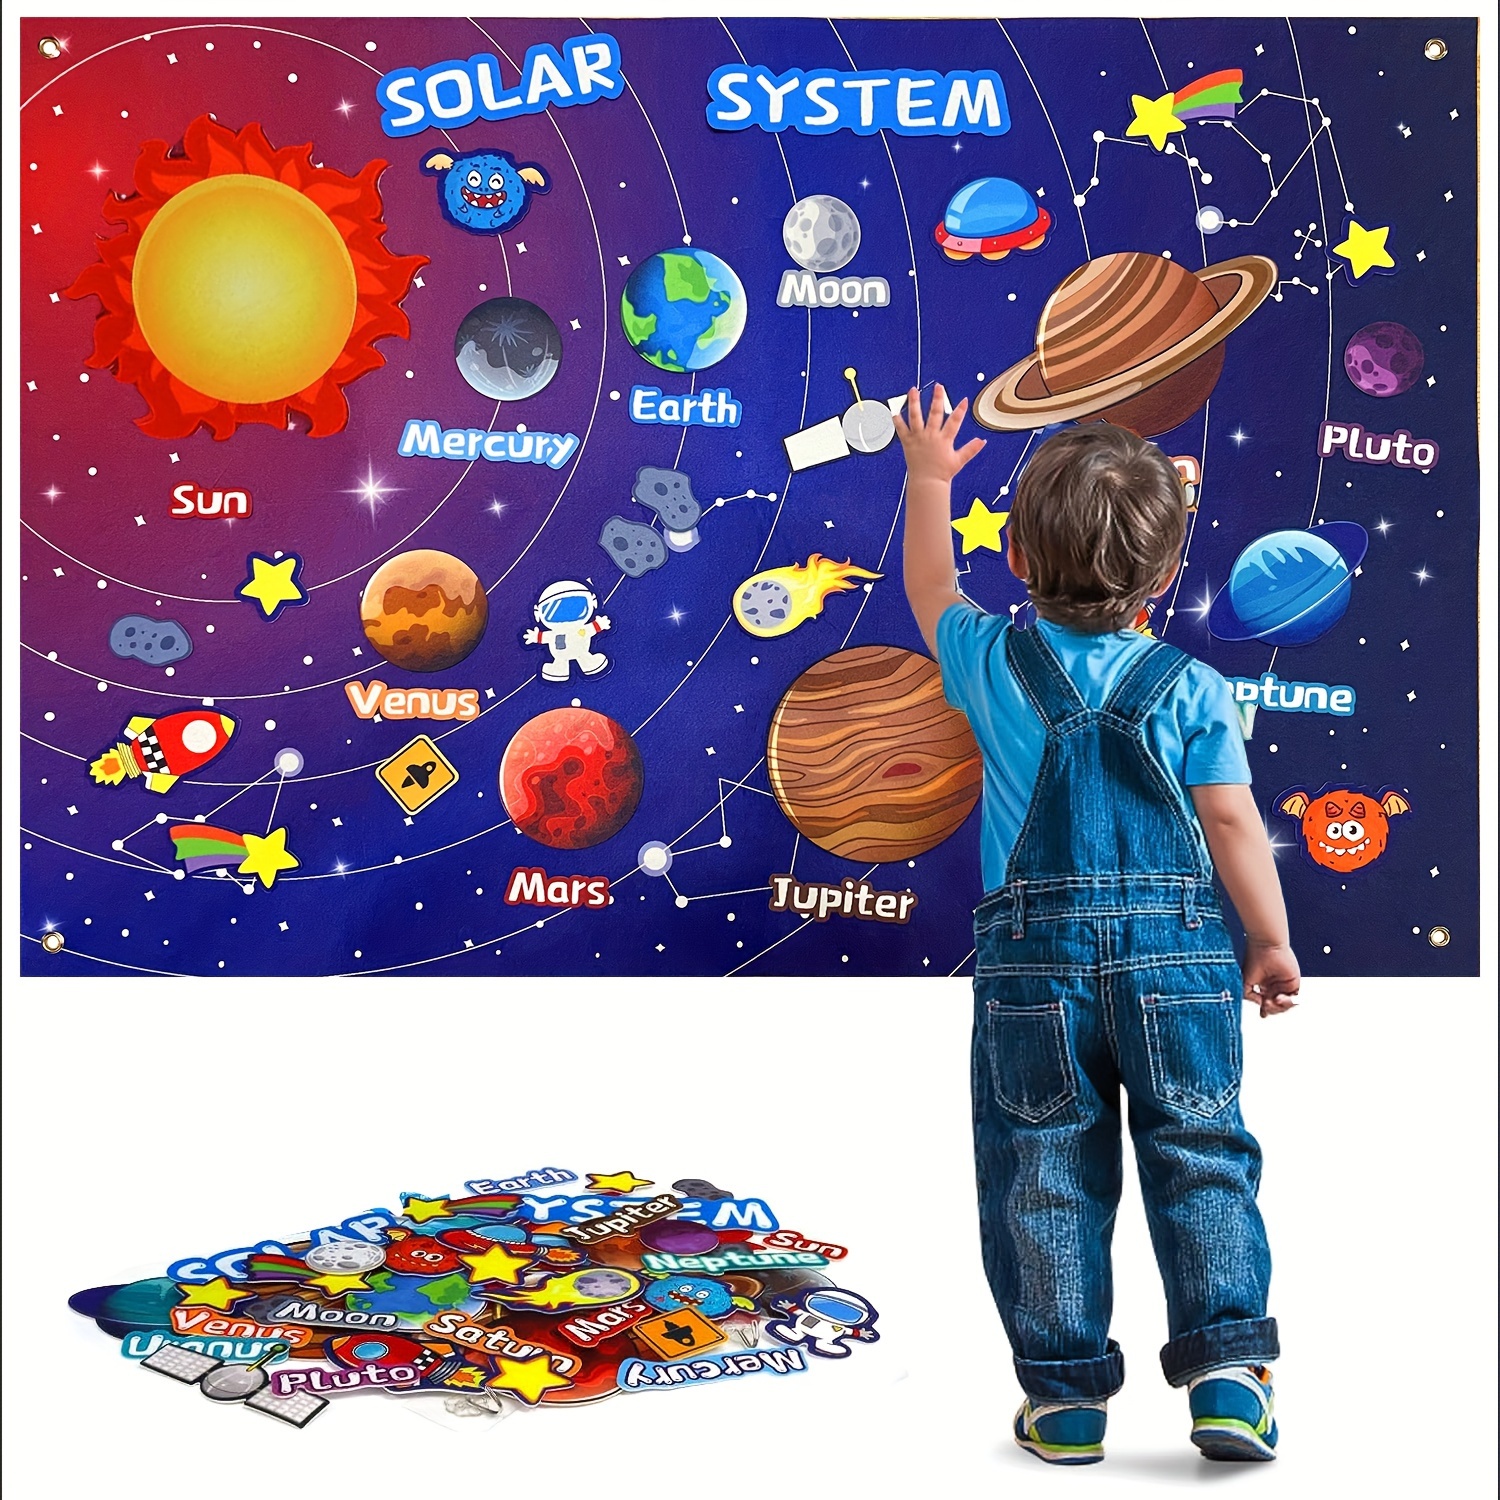 

41pcs Space Feeling Board Story Set, 43x29 Inch Solar System Universe Story And Hook Astronaut Planetary Alien Galaxy Can Hang Handicraft Learning Children's Interactive Game Toolkit, Christmas Gift